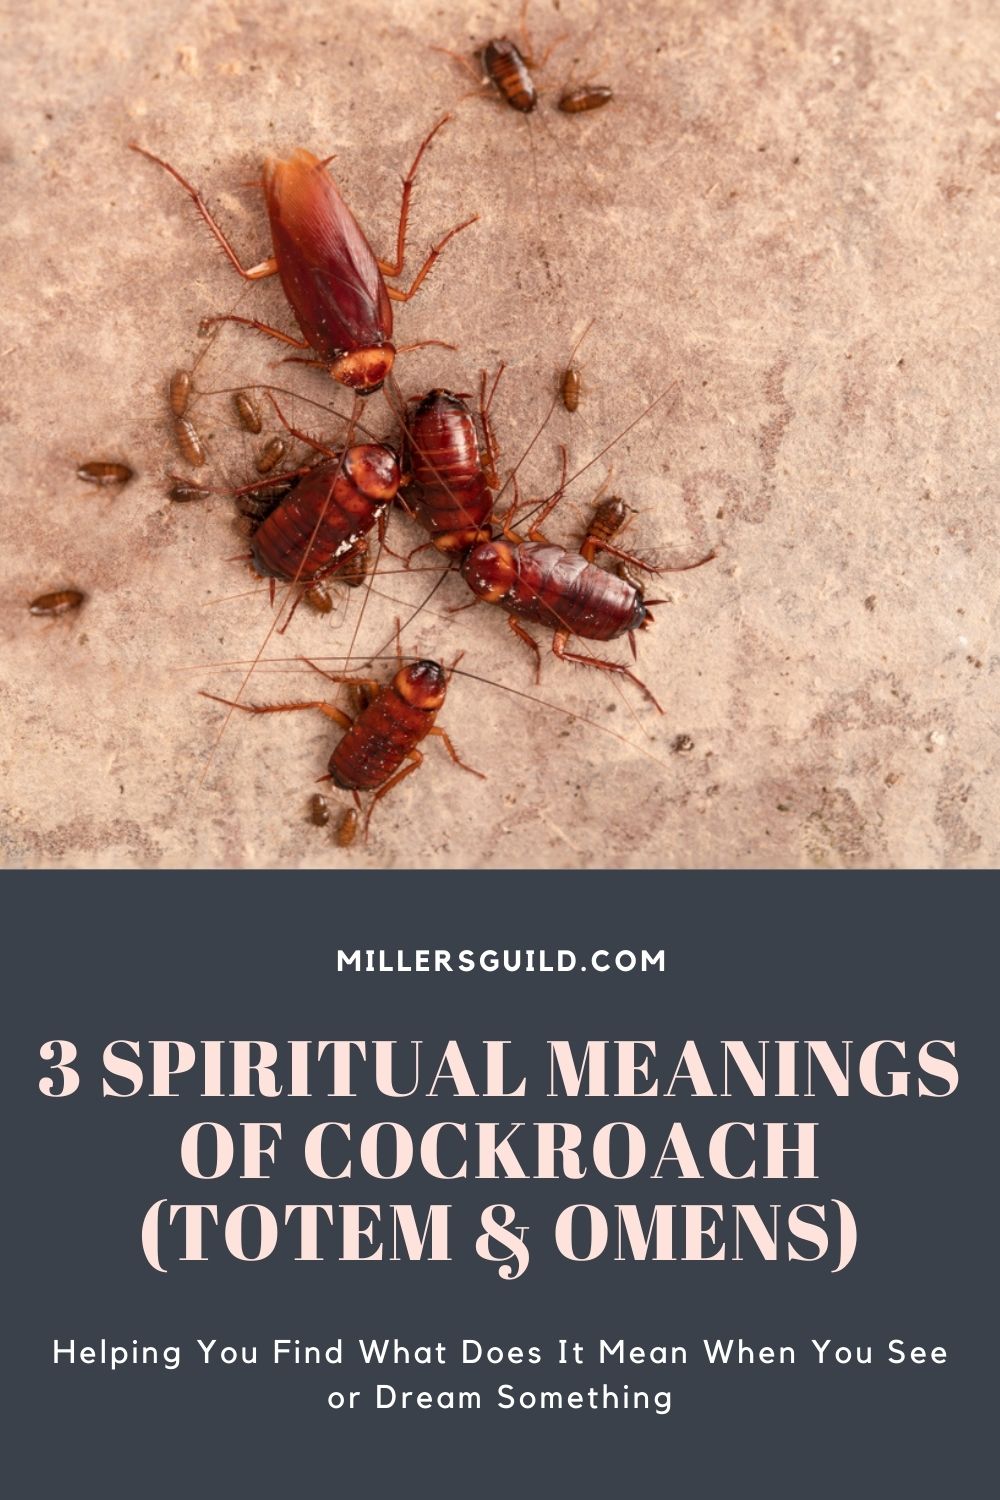 3 Spiritual Meanings of Cockroach (Totem & Omens) 1